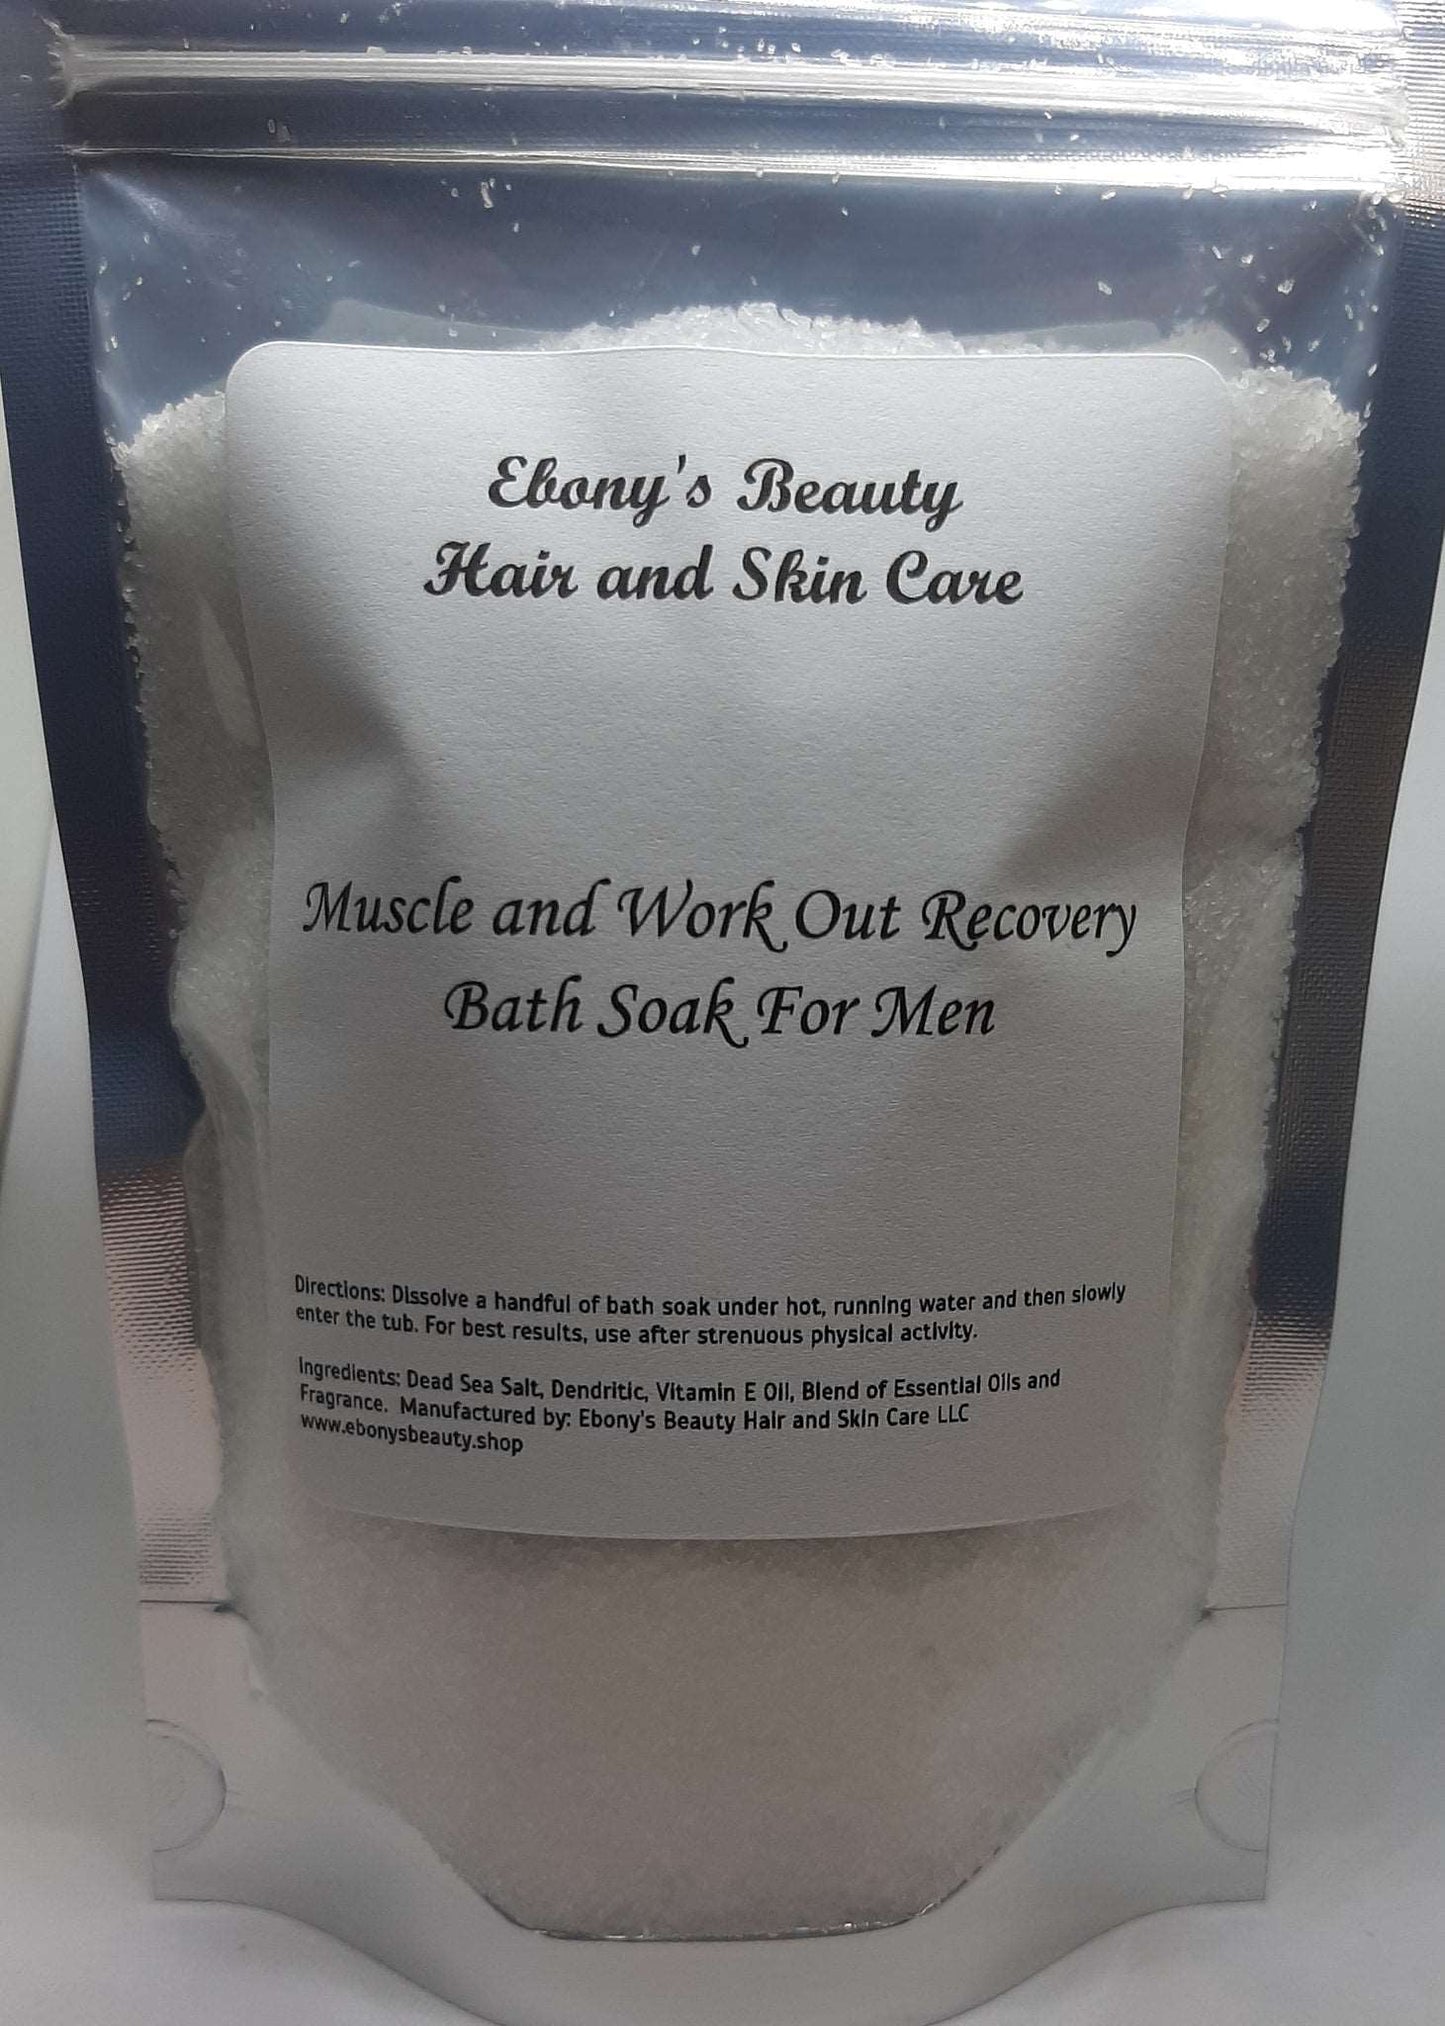 Muscle and Work Out Recovery Bath Soak For Men - Ebony's Beauty Hair and Skin Care LLC